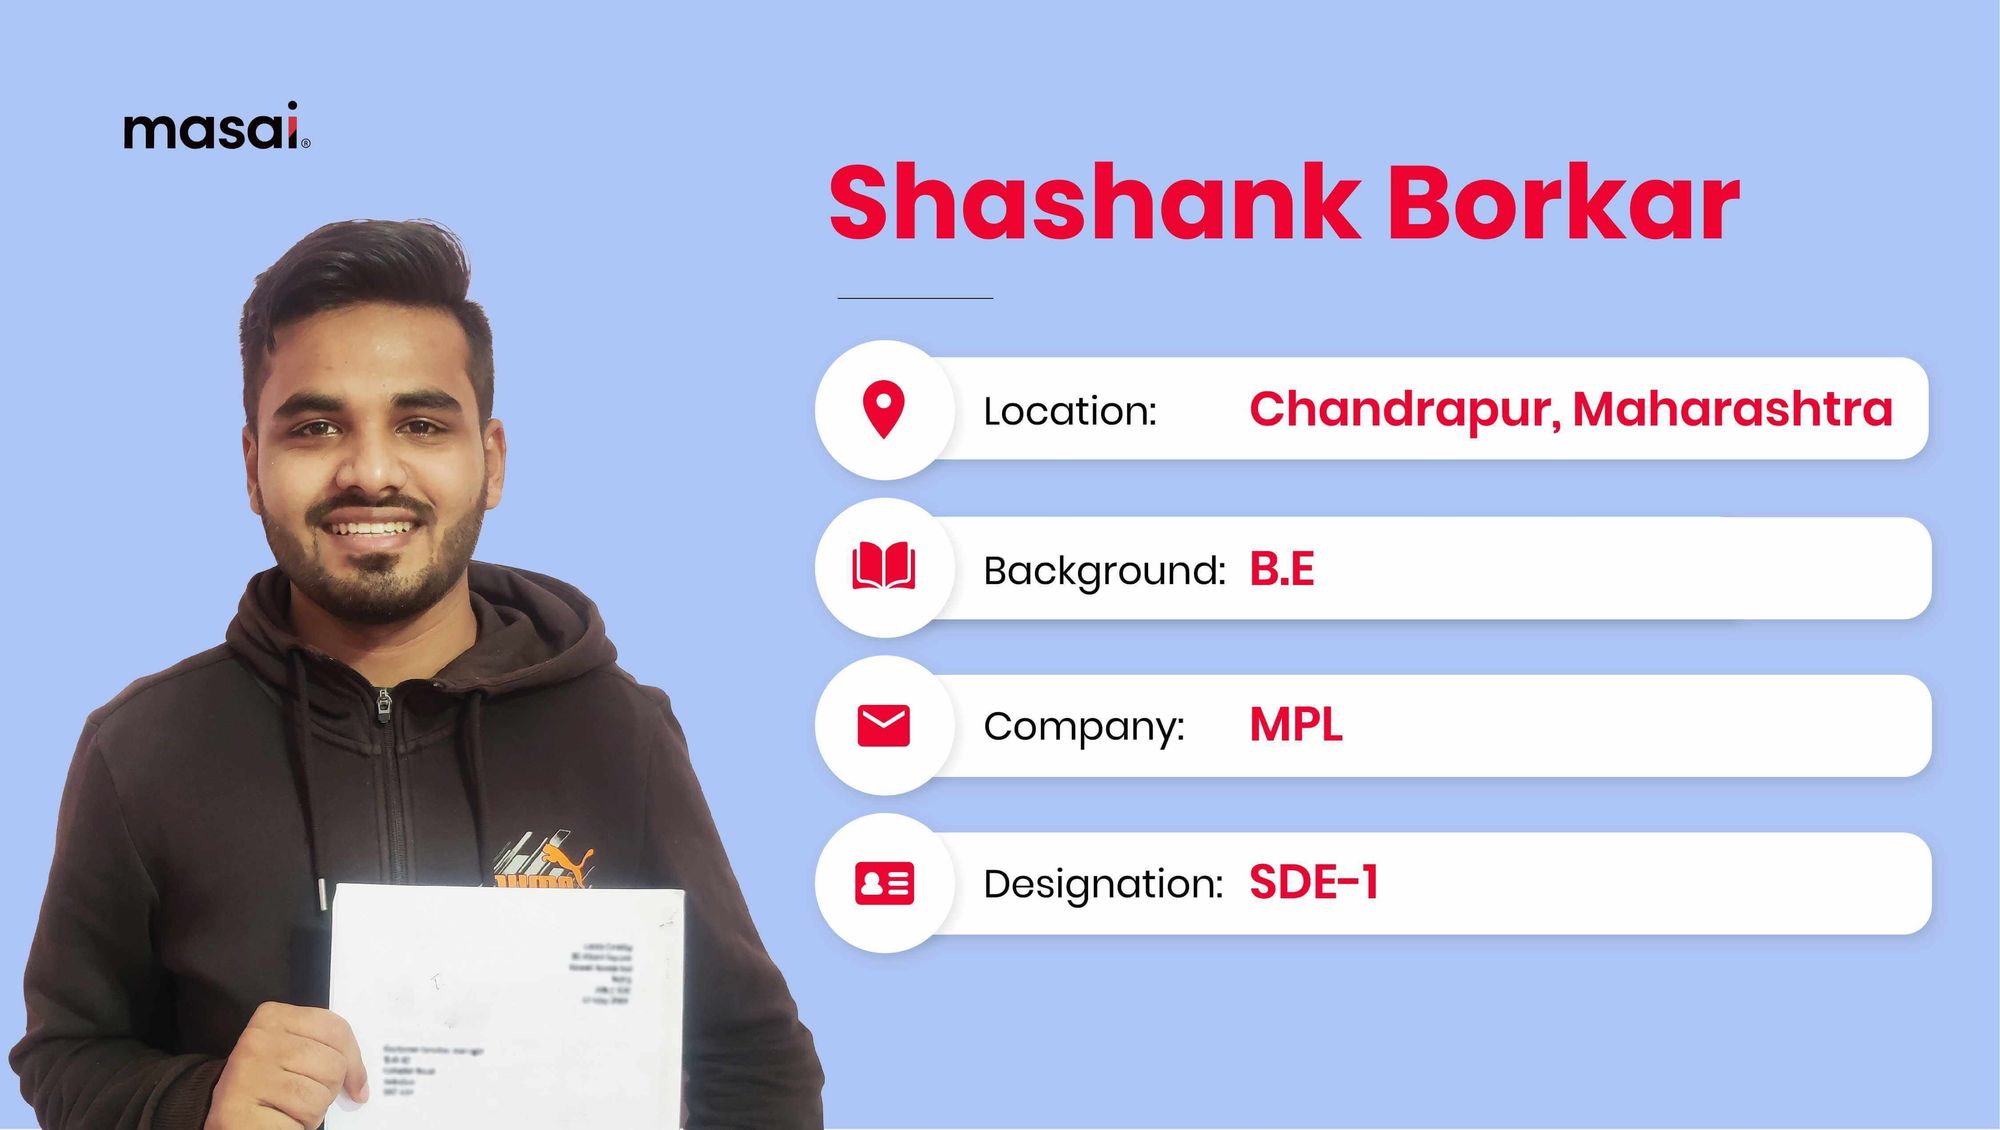 Shashank left Amazon to upskill with Masai and doubled his package